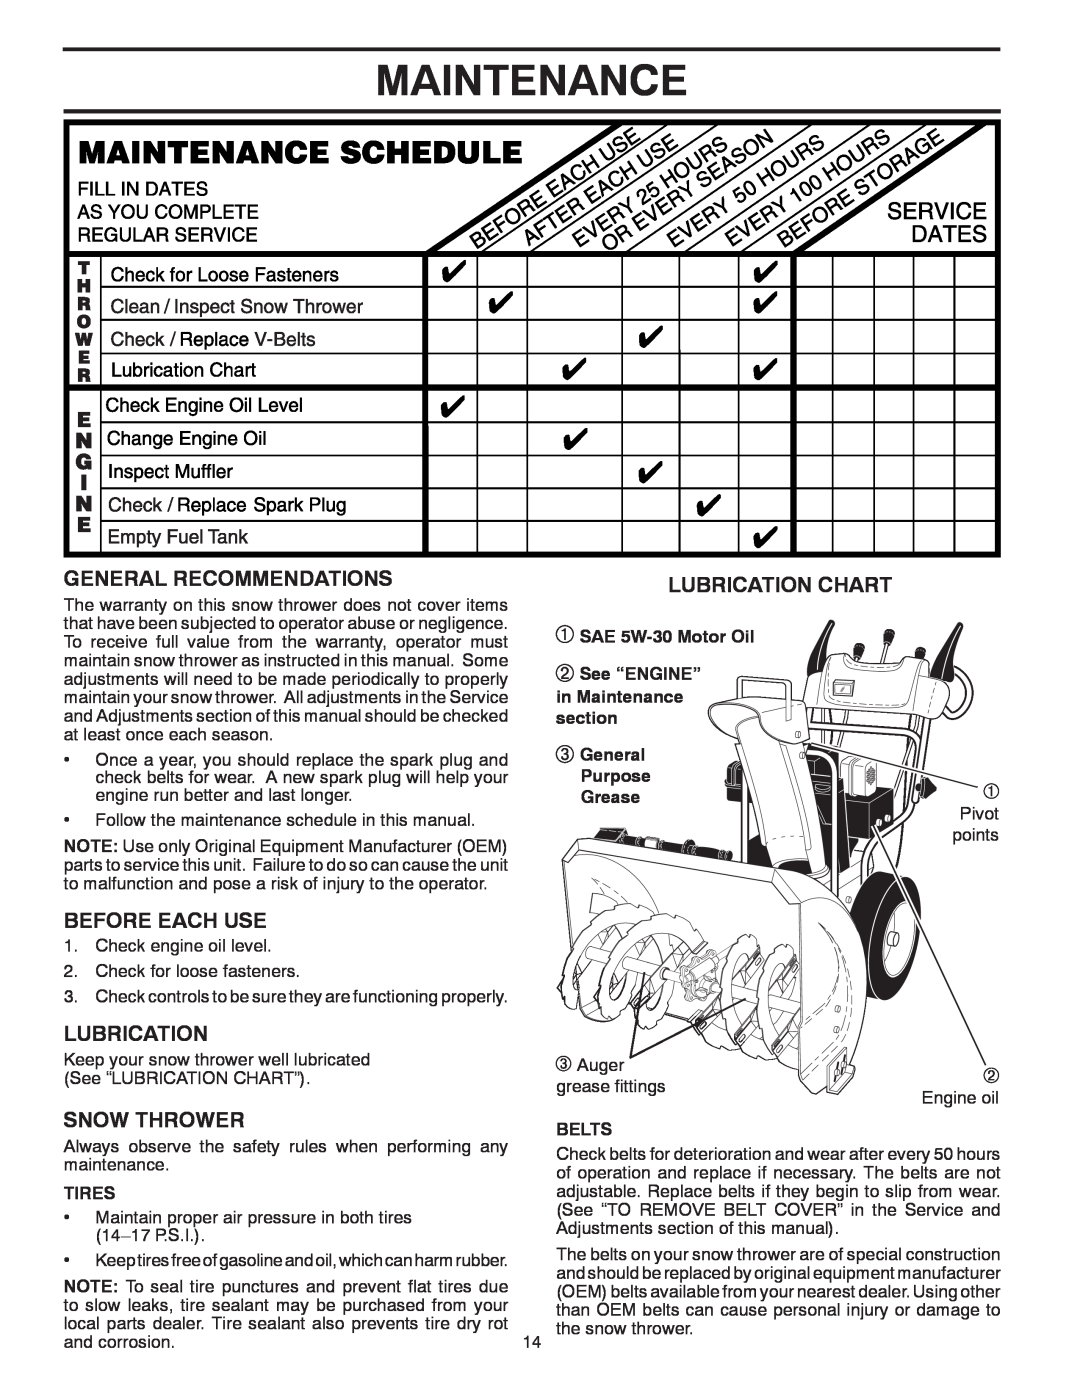 Poulan 436134 Maintenance, General Recommendations, Lubrication Chart, Before Each Use, Snow Thrower, Purpose Grease 